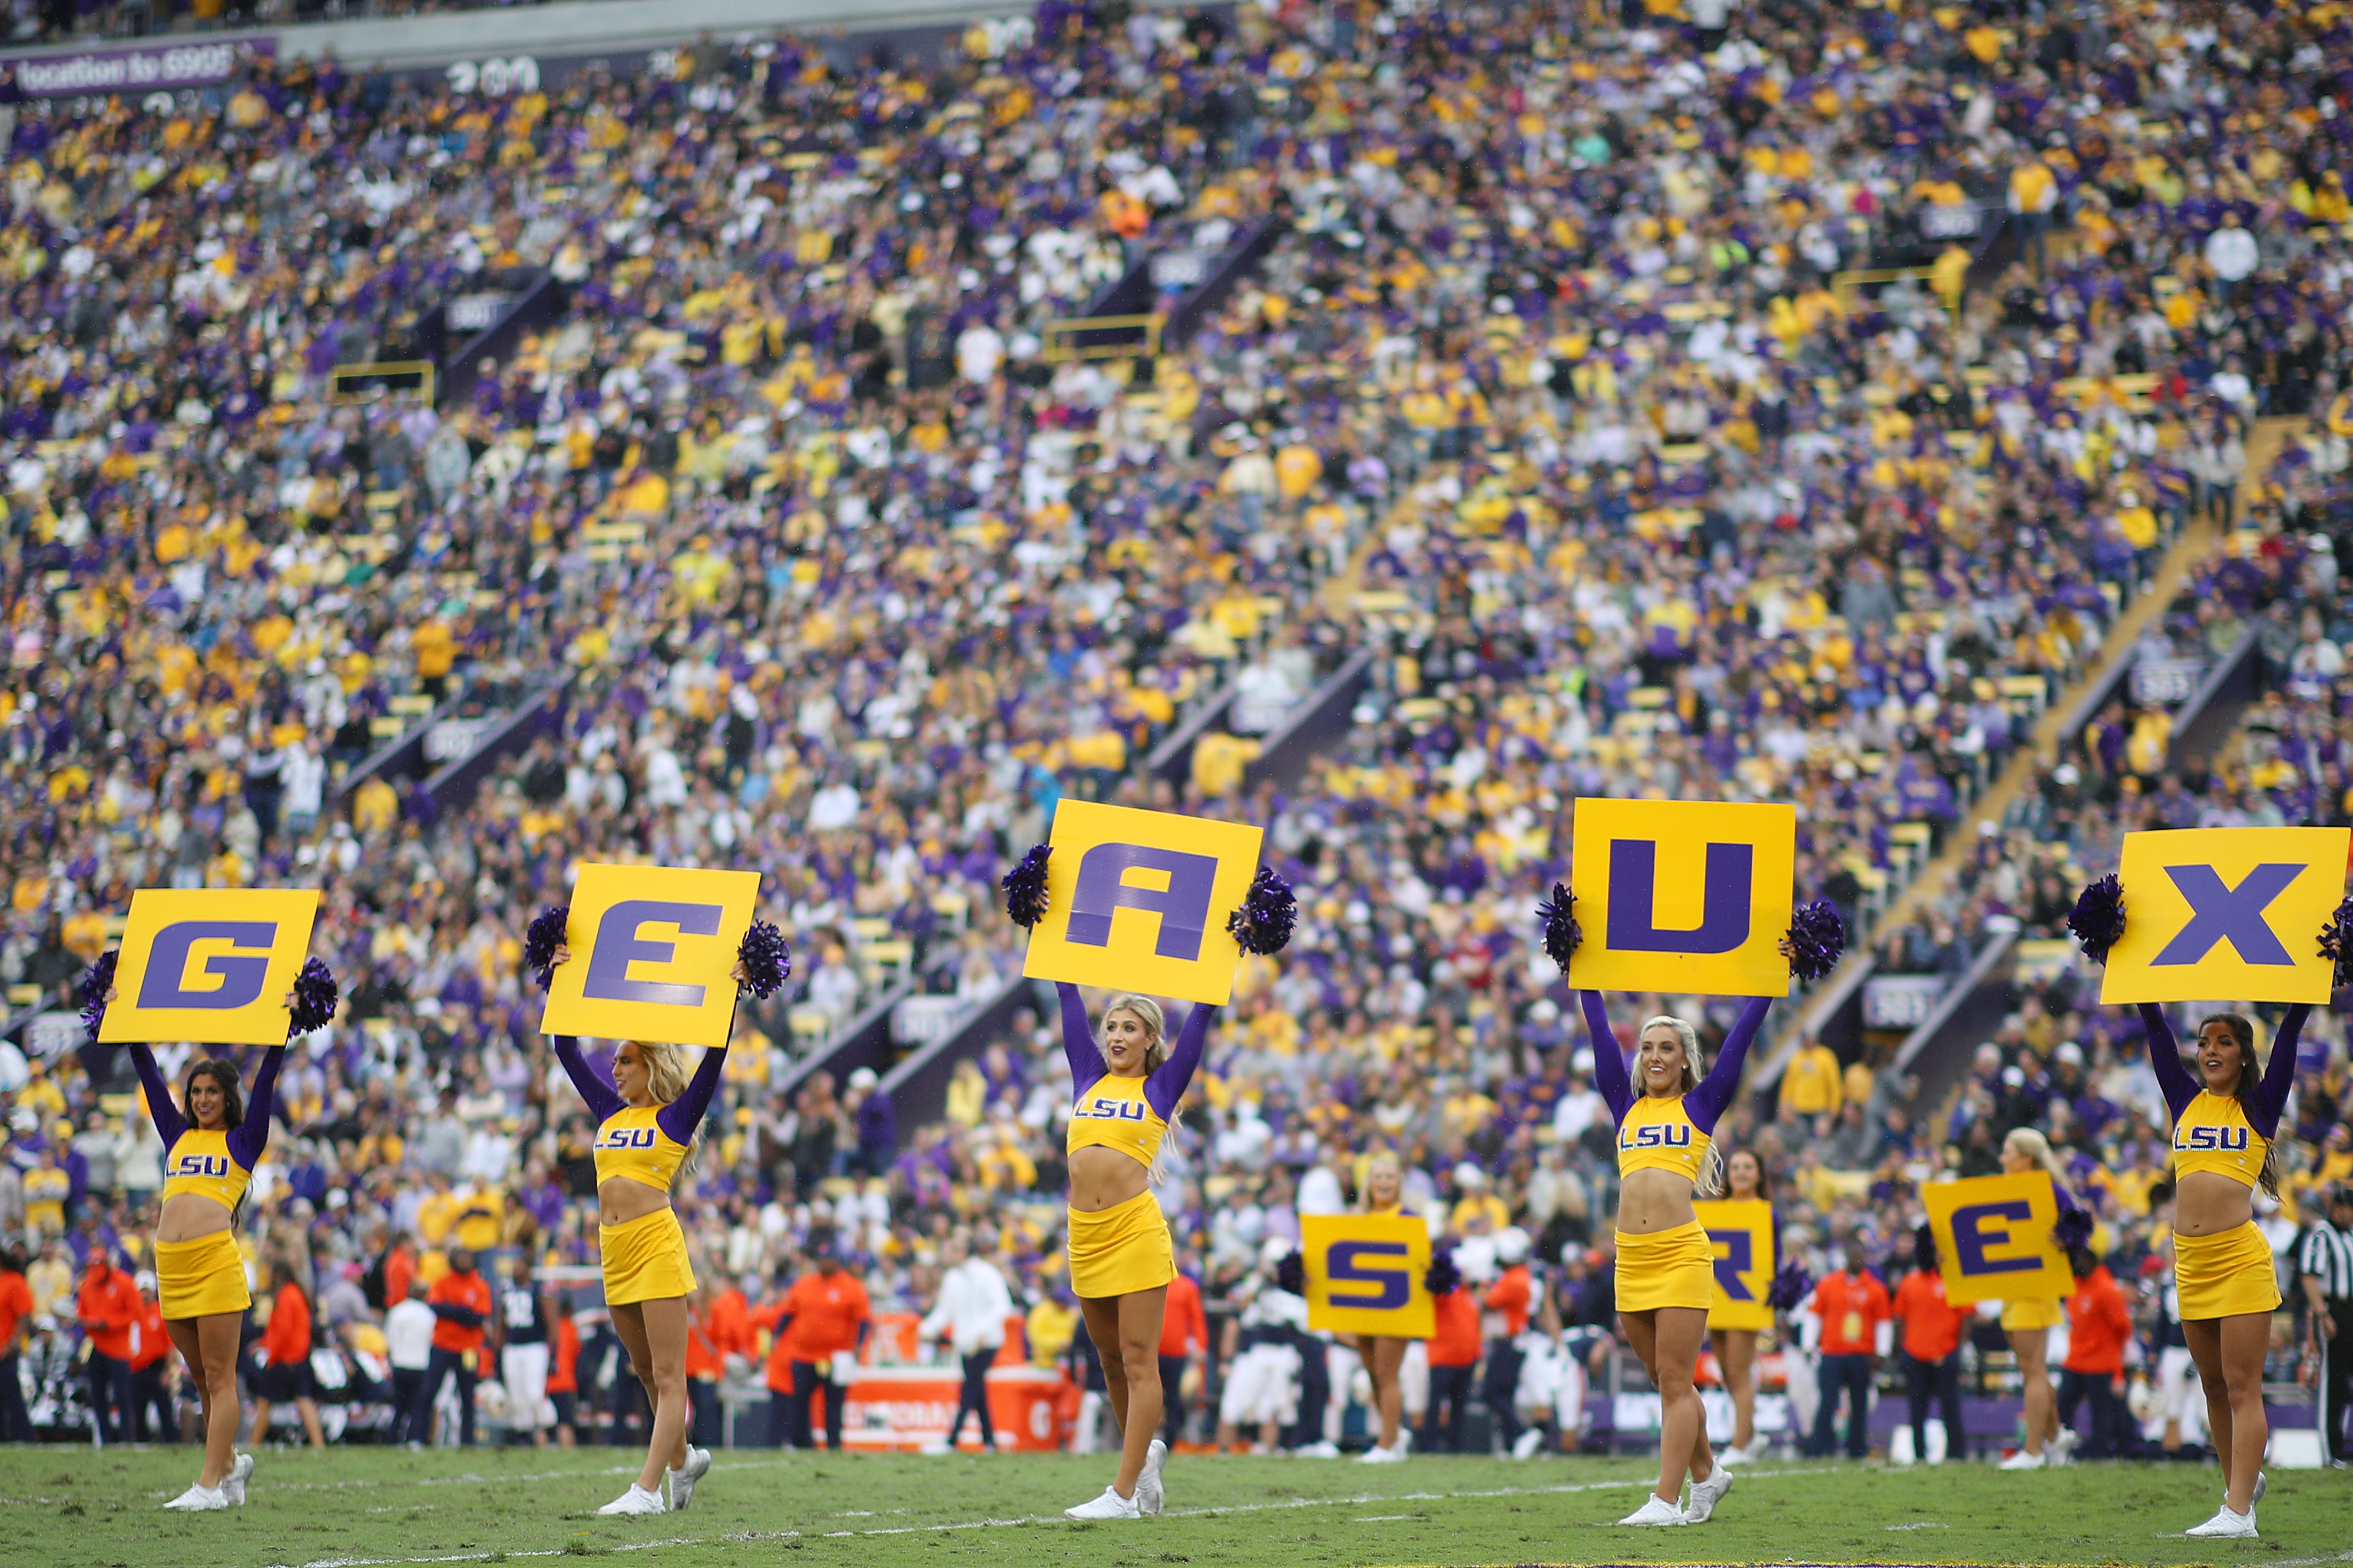 LSU cheerleaders on football field spelling out &quot;GEAUX&quot;